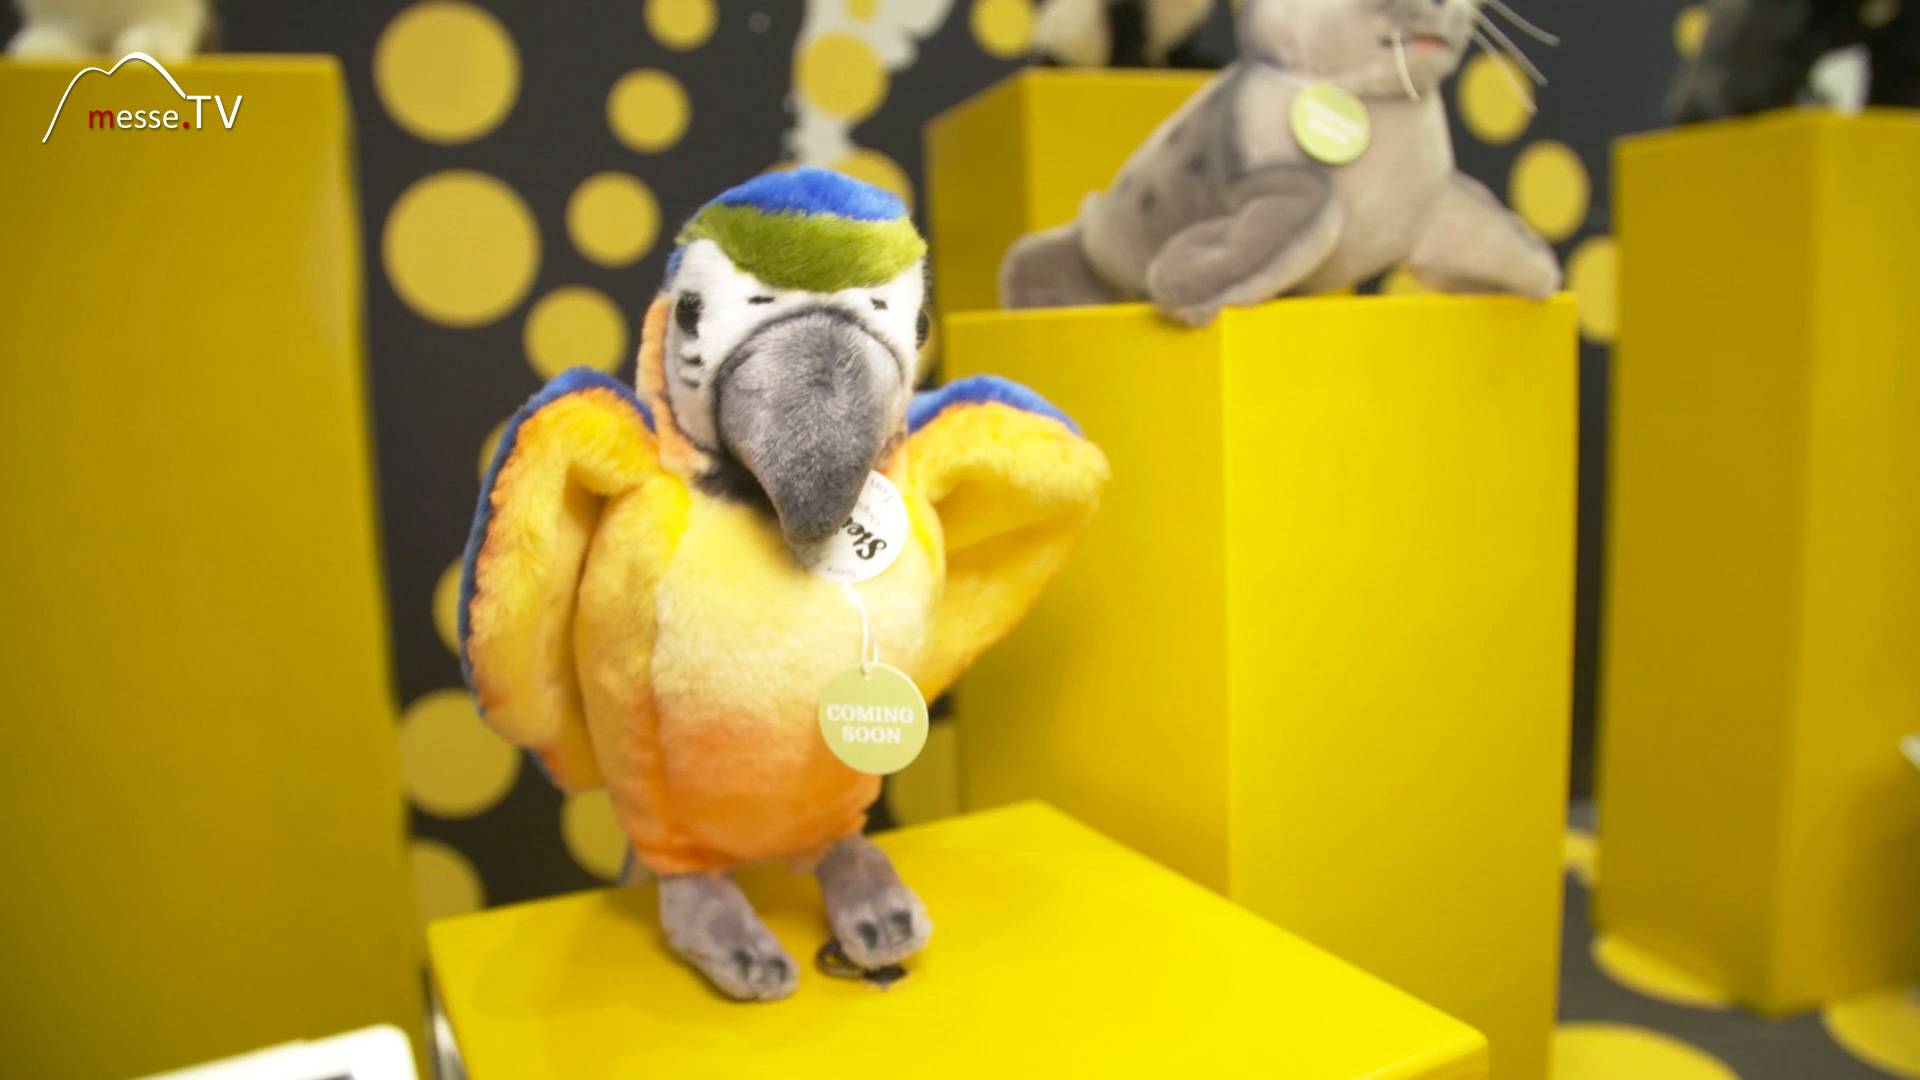 parrot National Geographic cooperation plush toys